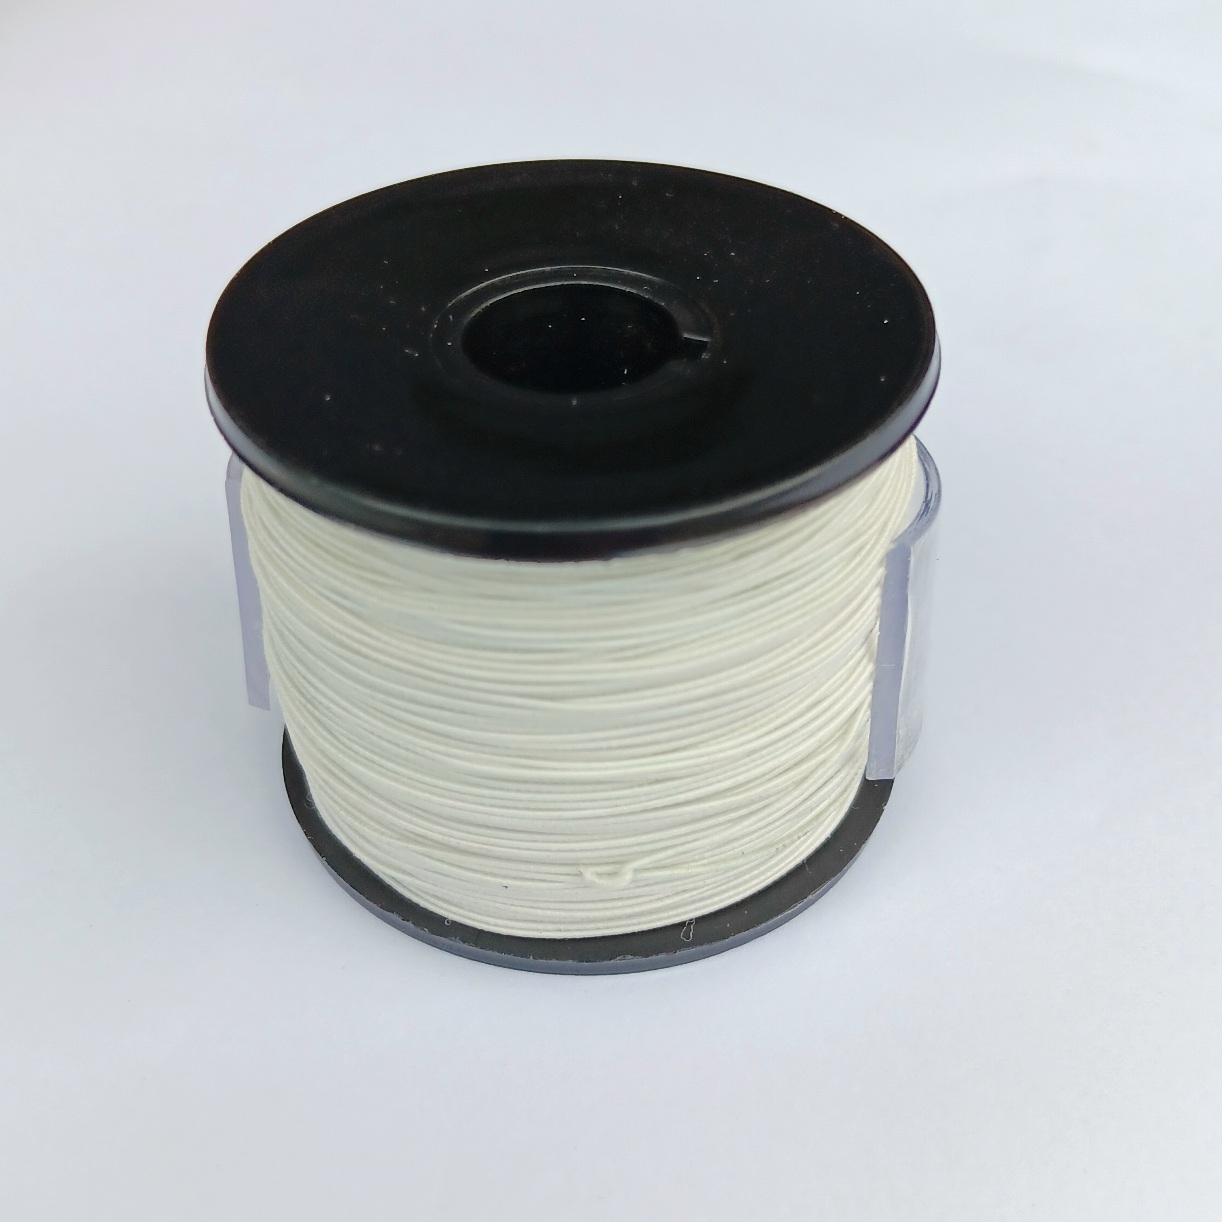 TEXTILE COVERED SILVER PLTED COPPER WIRE